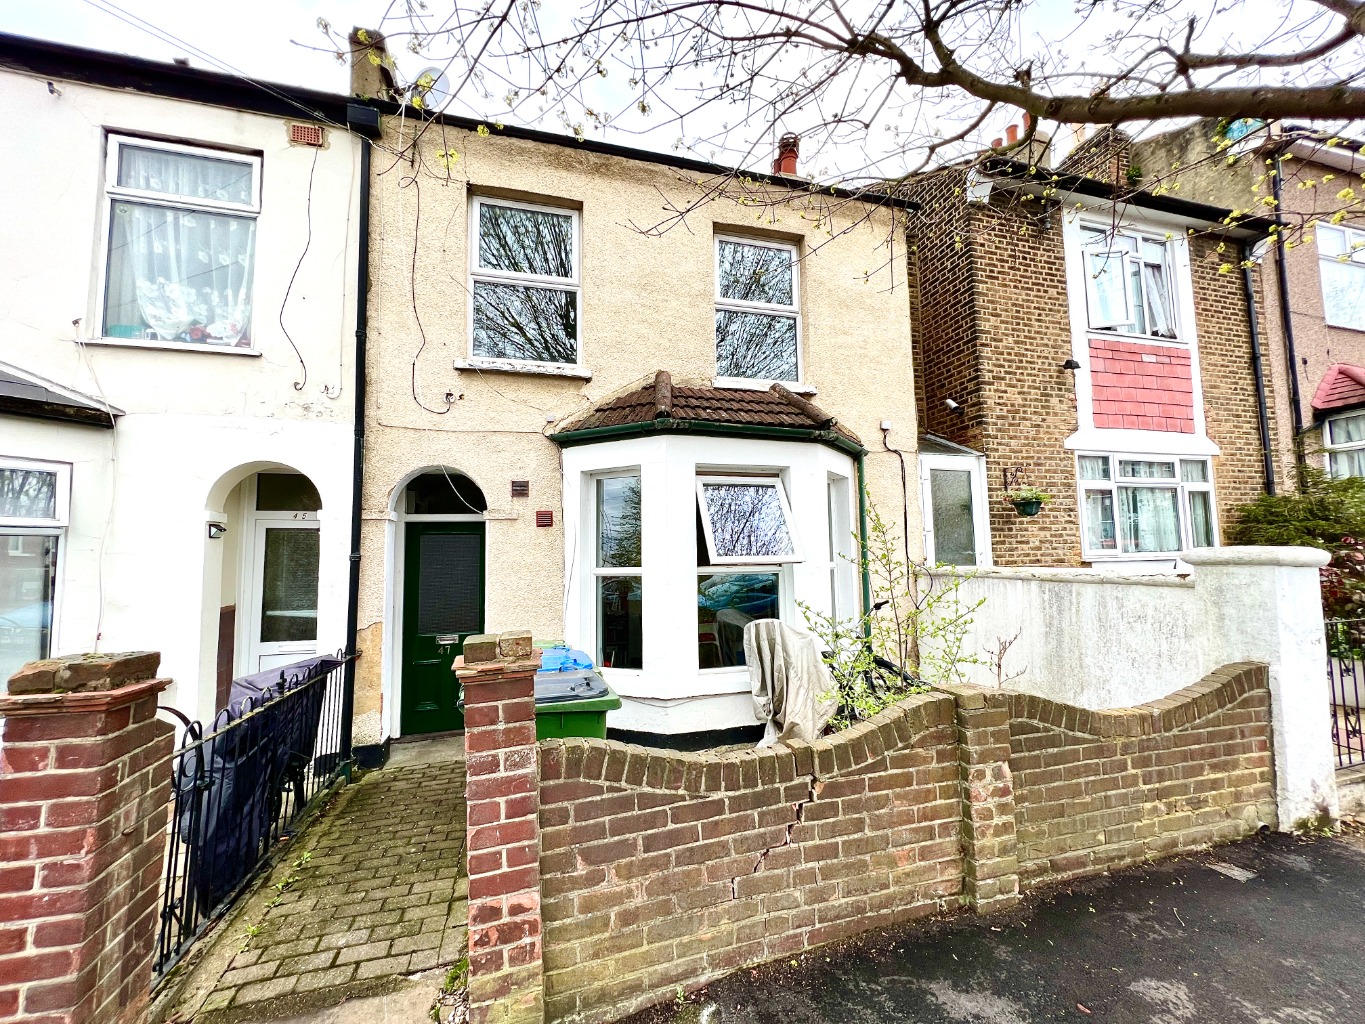 Beaumont Gibbs are delighted to offer this lovely two bedroomed ground floor Victorian conversion flat for sale. The property is situated in a 'No Through Road' and is offered with no forward chain.